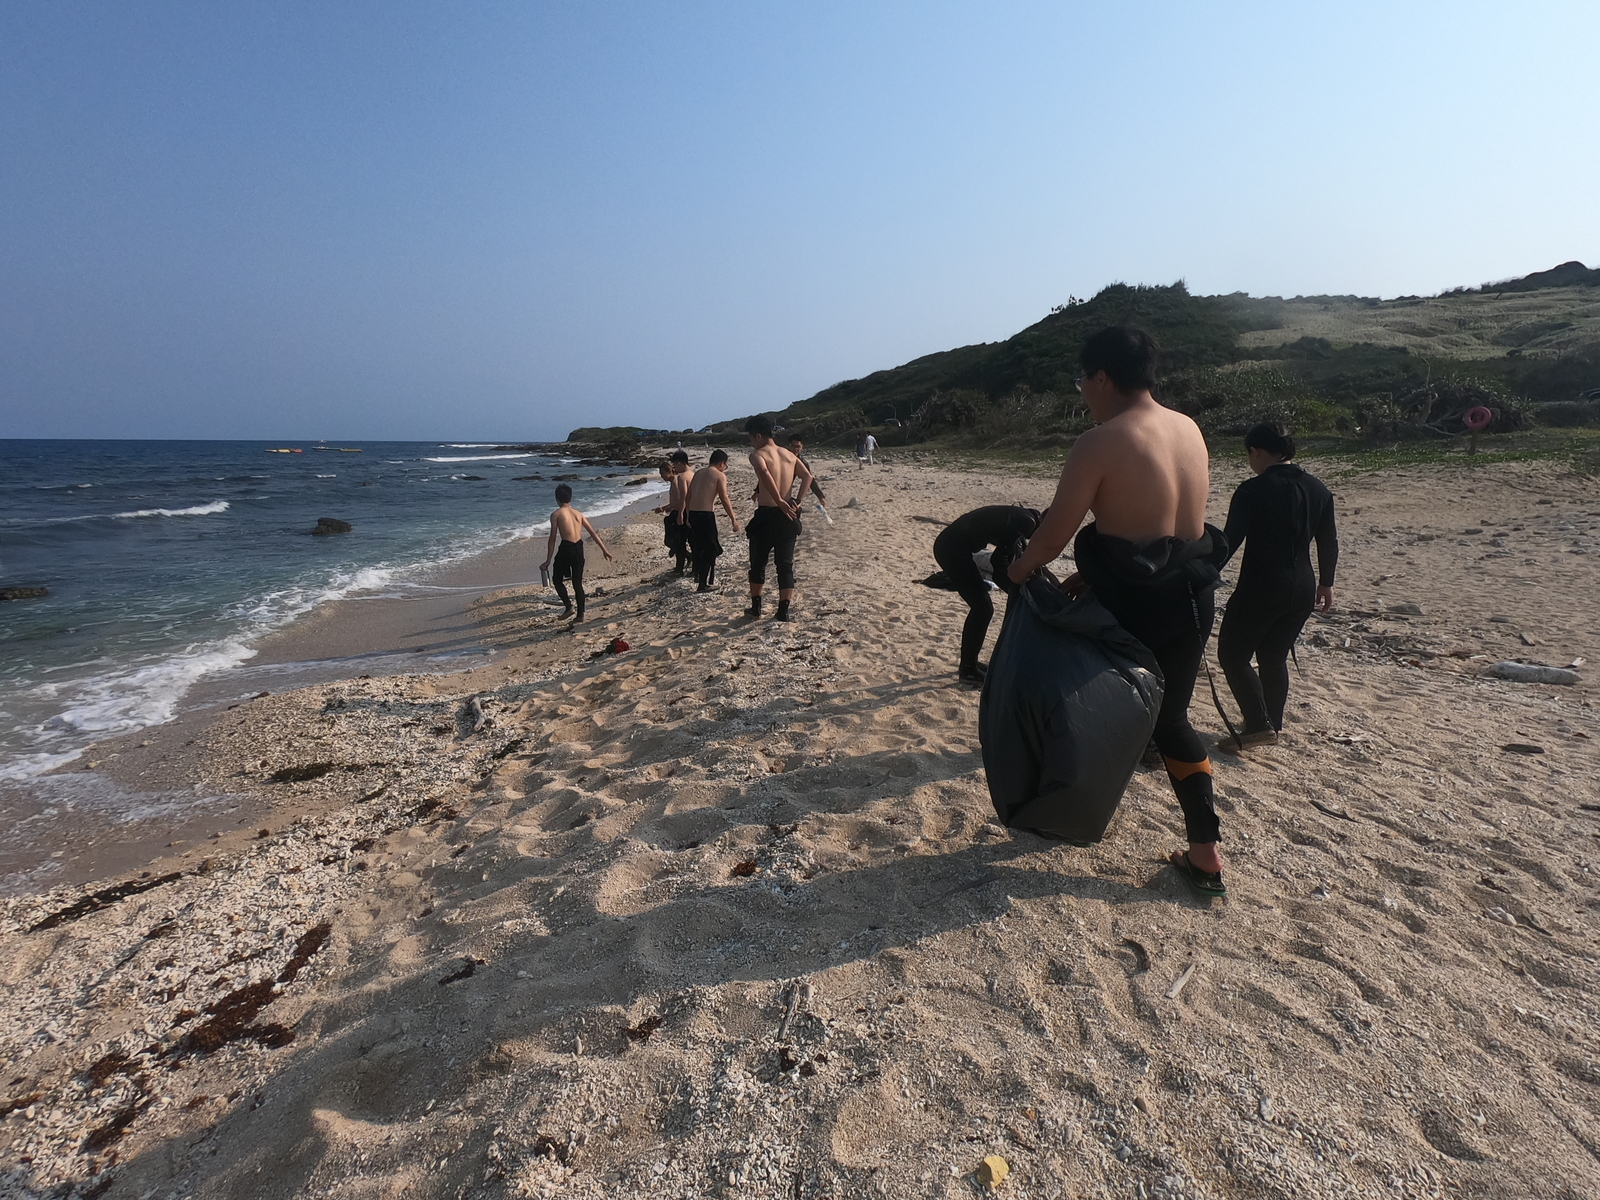 After the dive, the participants collected trash polluting the beach: multi-material drink boxes, painted wood, glass bottles and a large amount of plastic garbage: bottles, plastic packaging, straws, residues of fishing nets, even a kickboard.